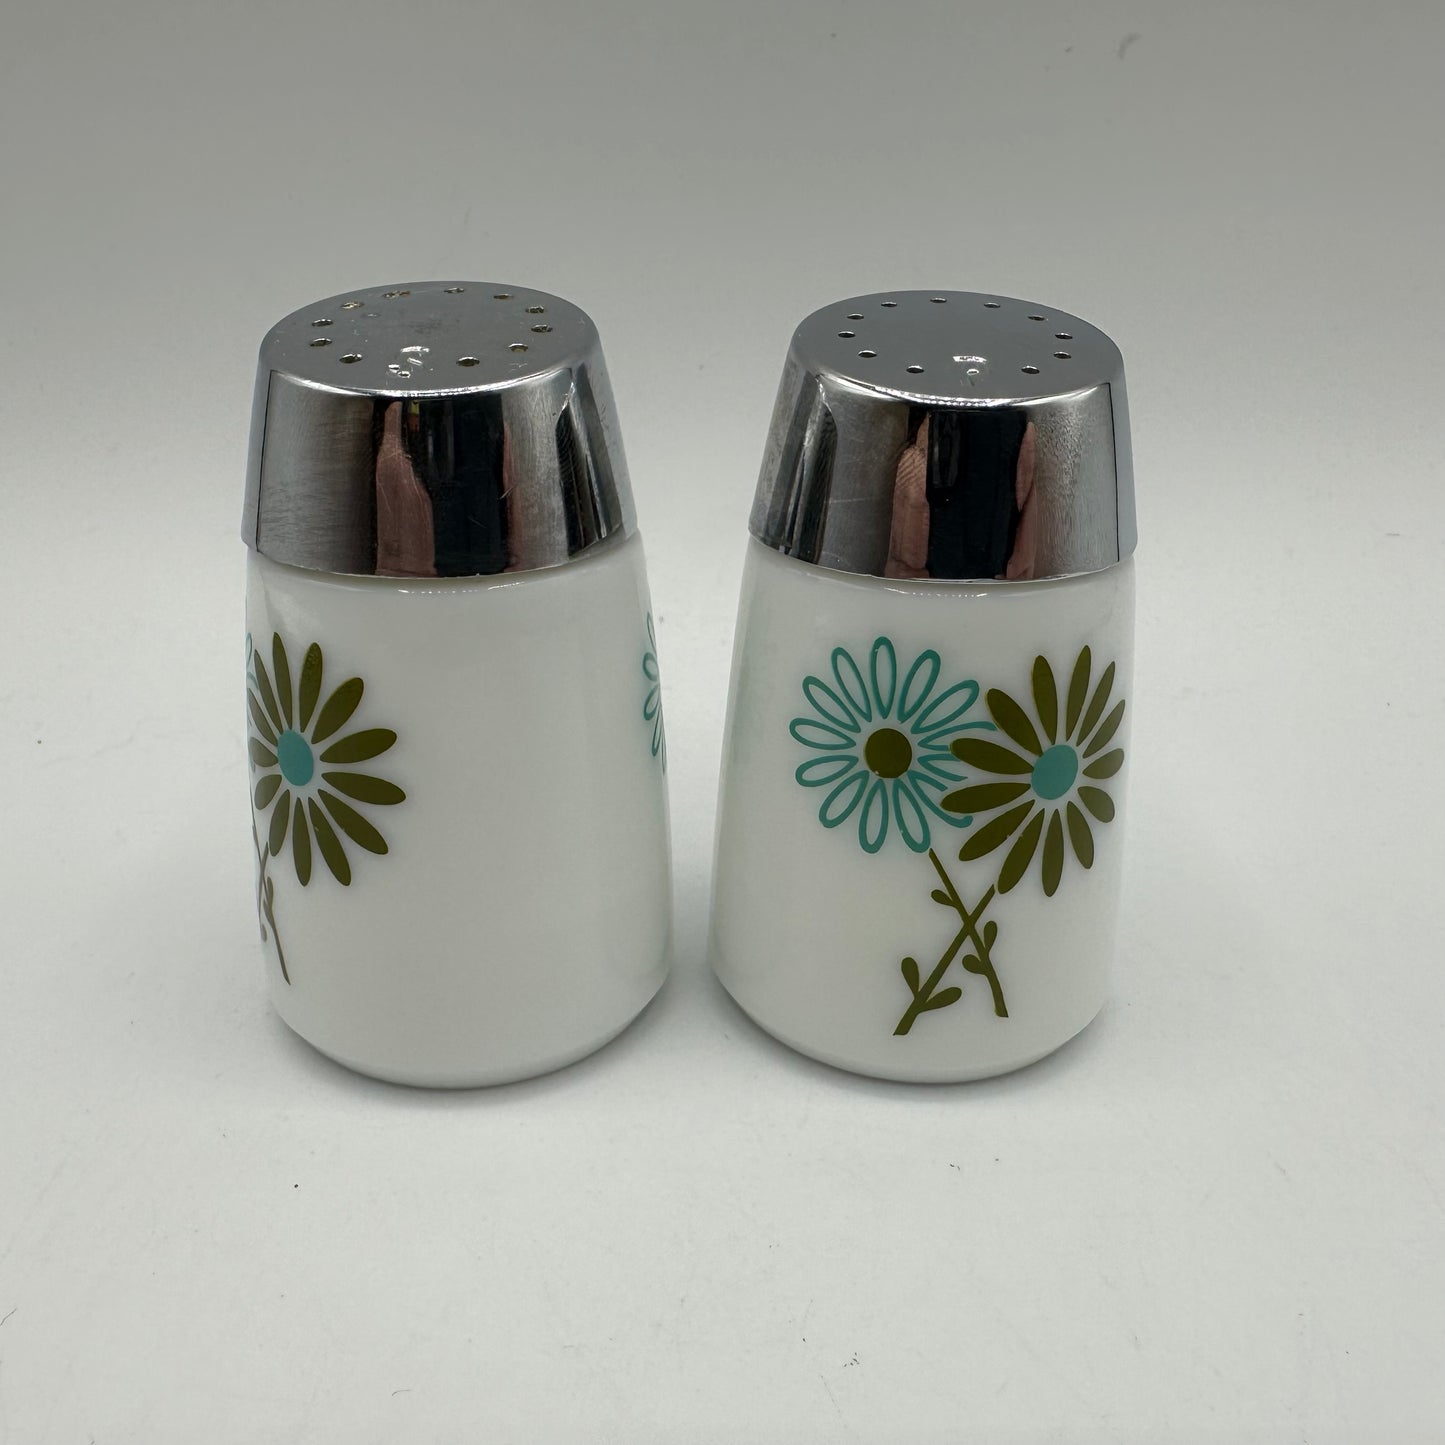 Salt and Pepper Shakers - Turquoise